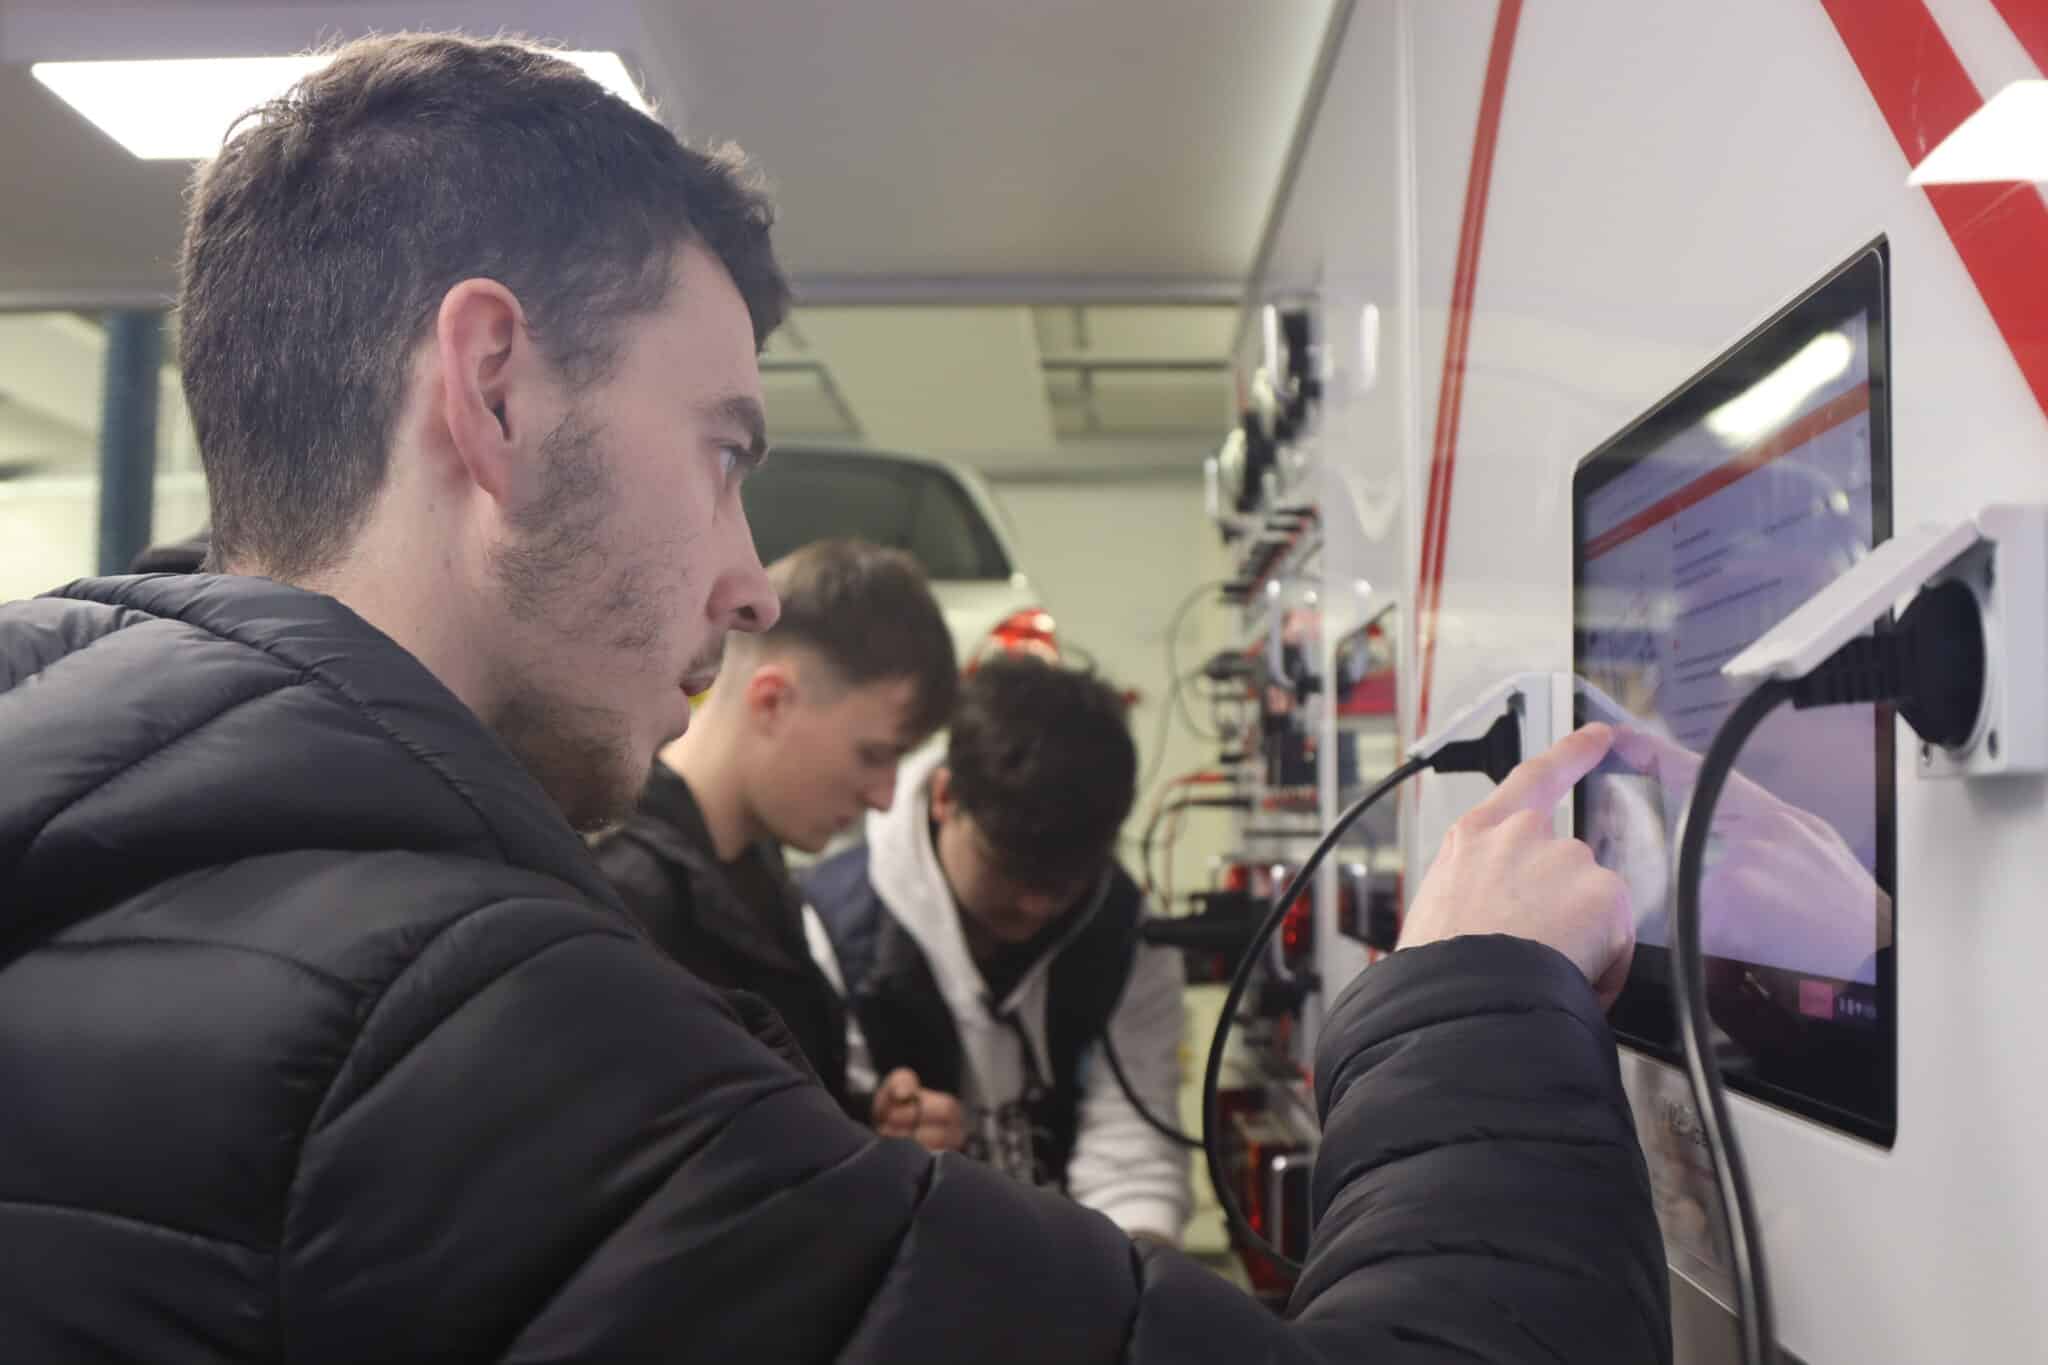 Motor Vehicle apprentices accelerate learning with EMER